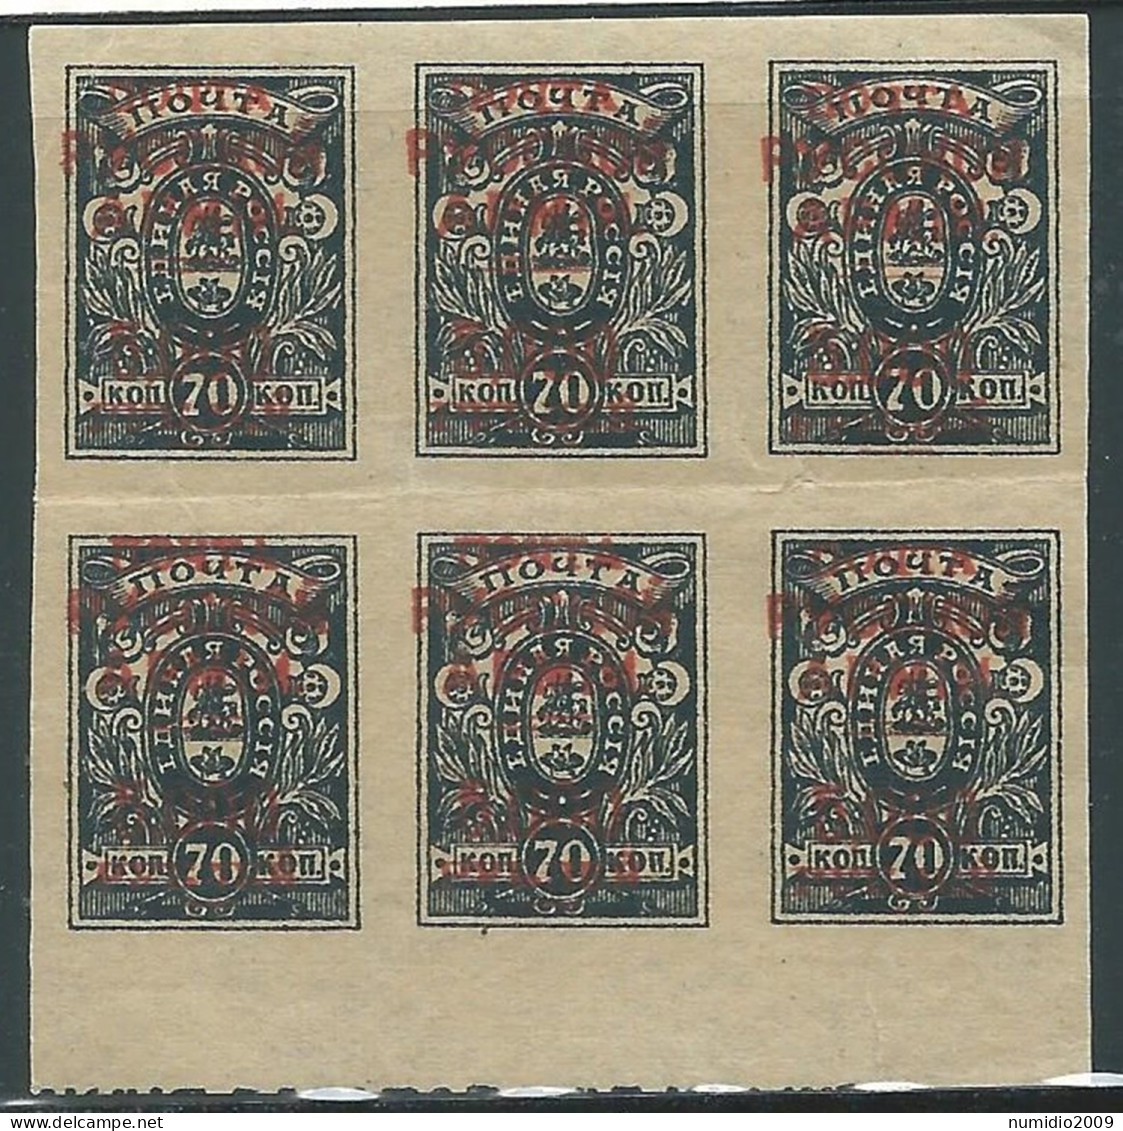 1921 RUSSIA WRANGEL ISSUES RUSSIAN STAMPS 20000 R SU 70 K SET OF 6 MH * - SV14 - Wrangel Army